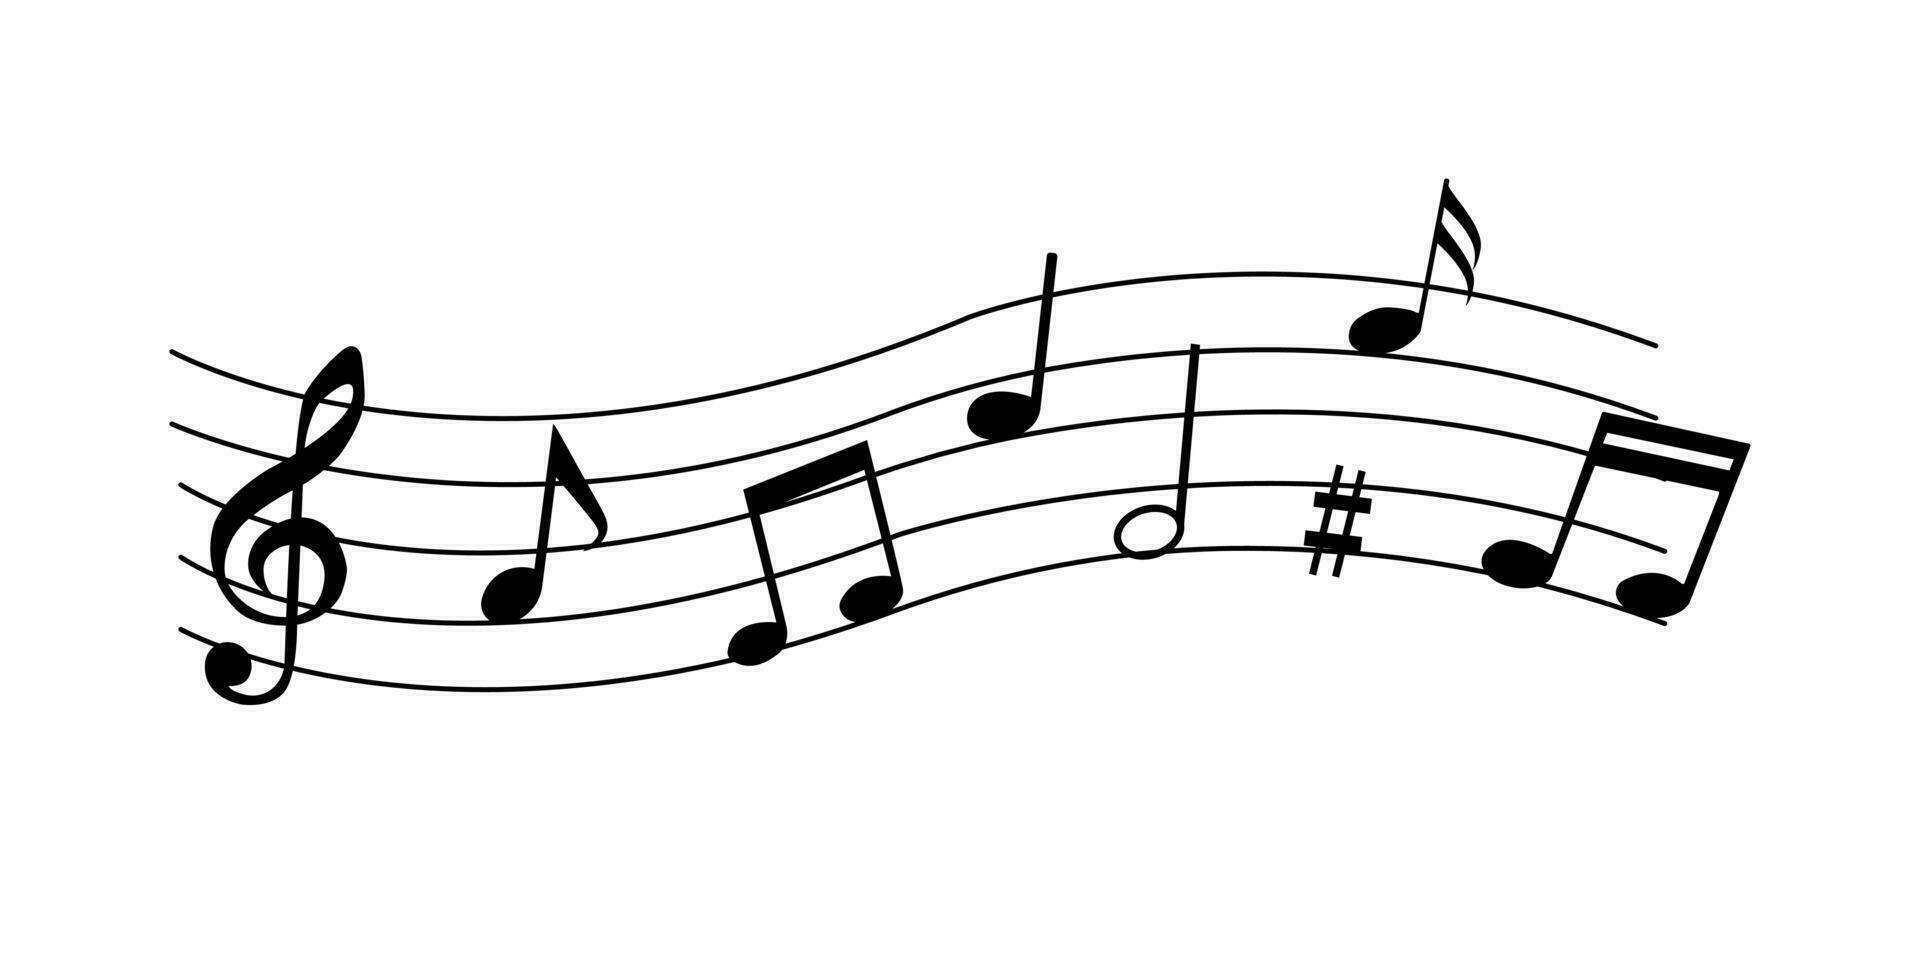 Music notes, musical design element. Isolated vector illustration